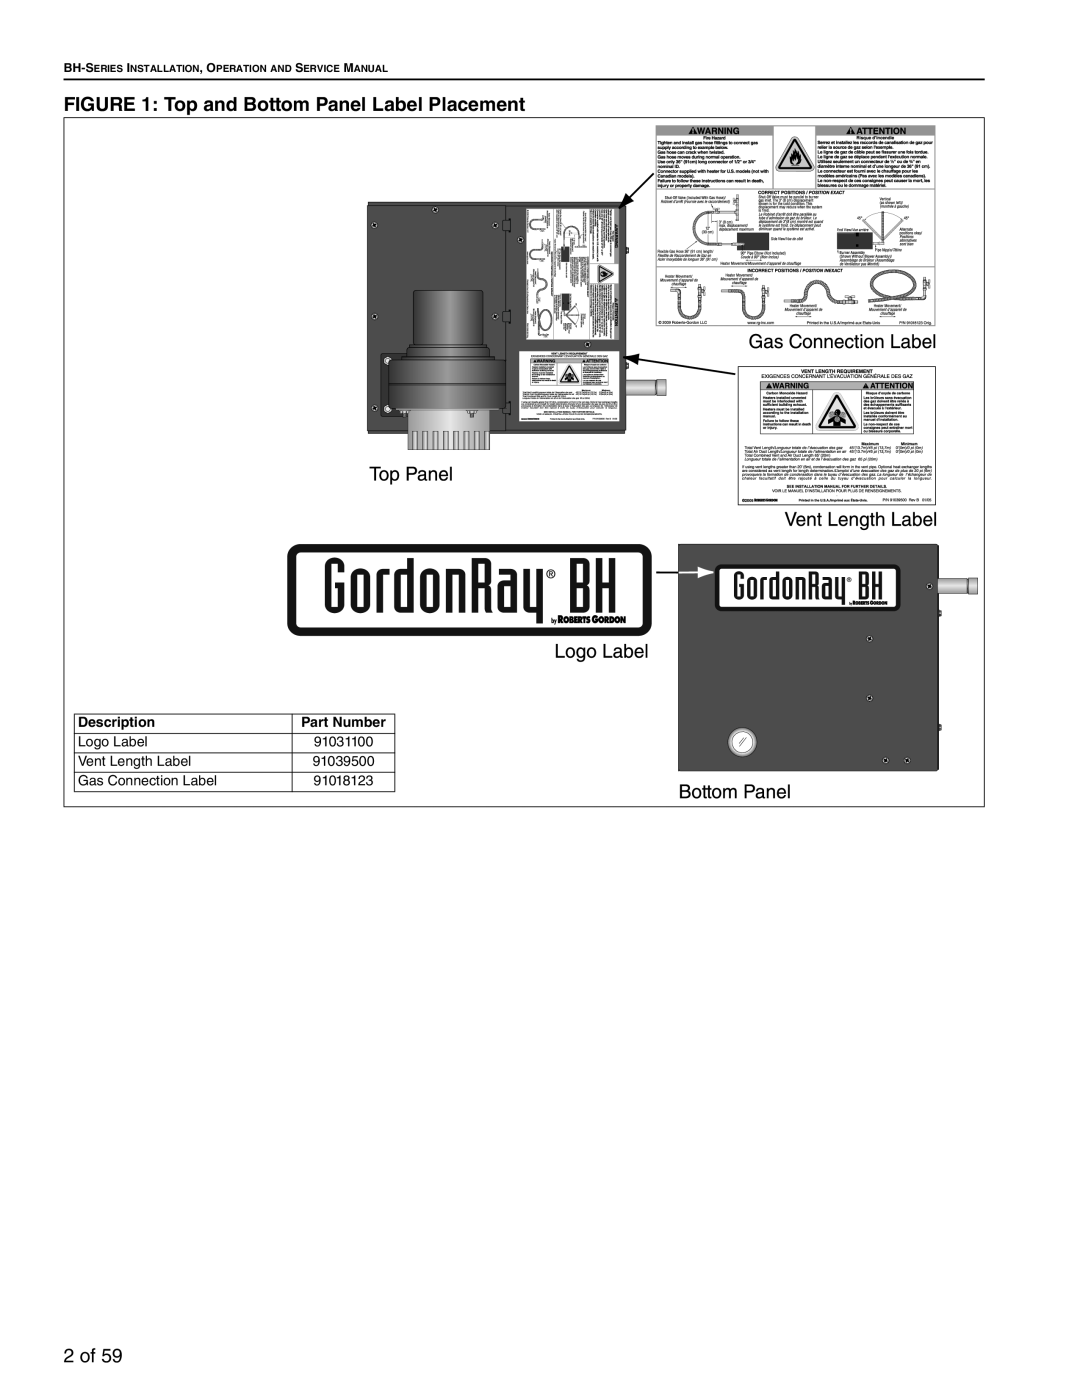 Roberts Gorden BH-80, BH-60, BH-40, BH-150, BH-175 Top and Bottom Panel Label Placement, 2 of, Description, Part Number 